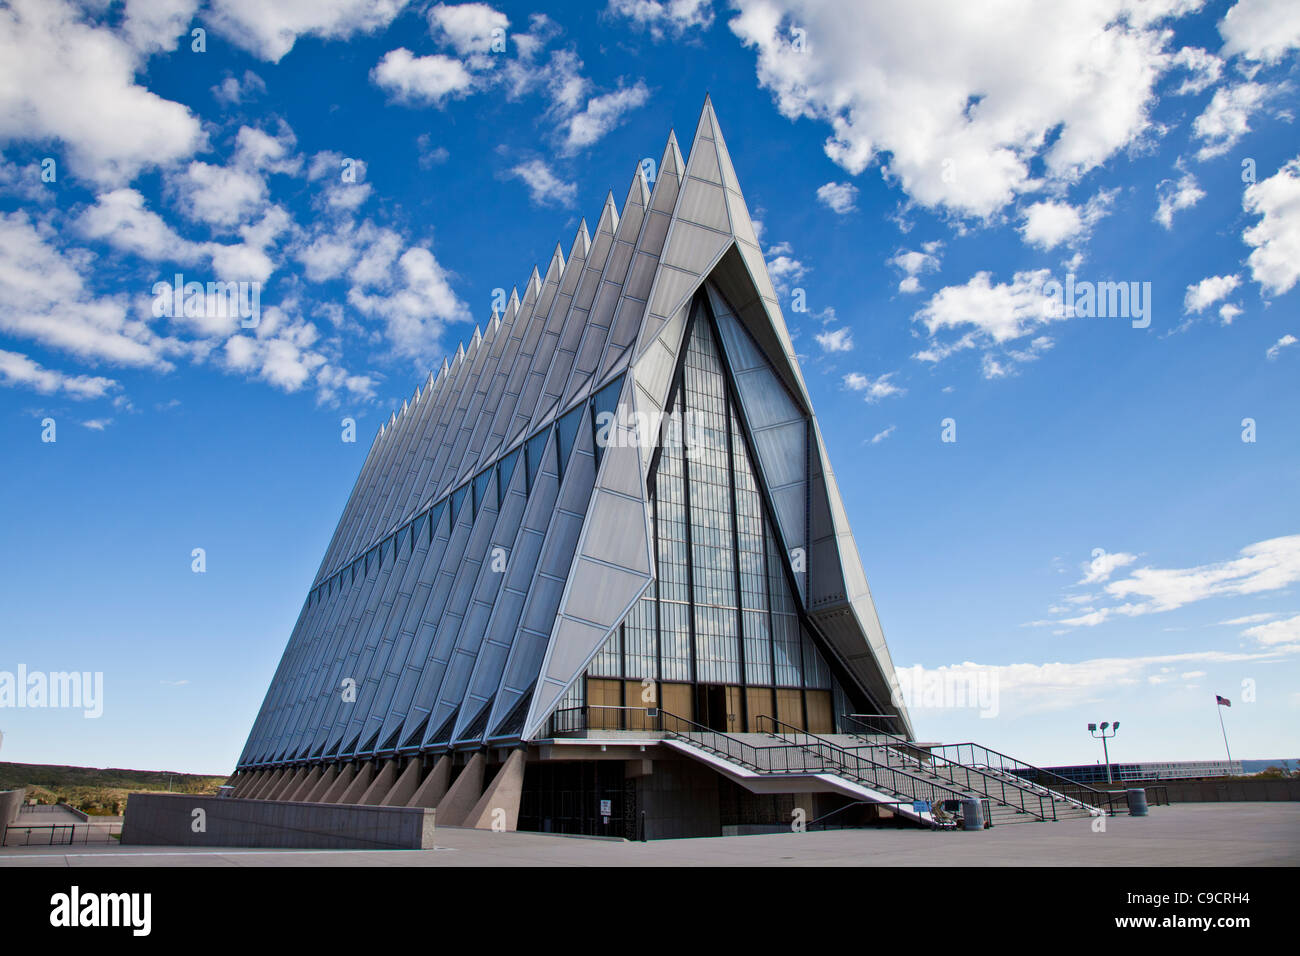 Air Force Academy Cadet Chapel, completed in 1962, at the United States Air Force Academy in Colorado Springs, Colorado. Stock Photo